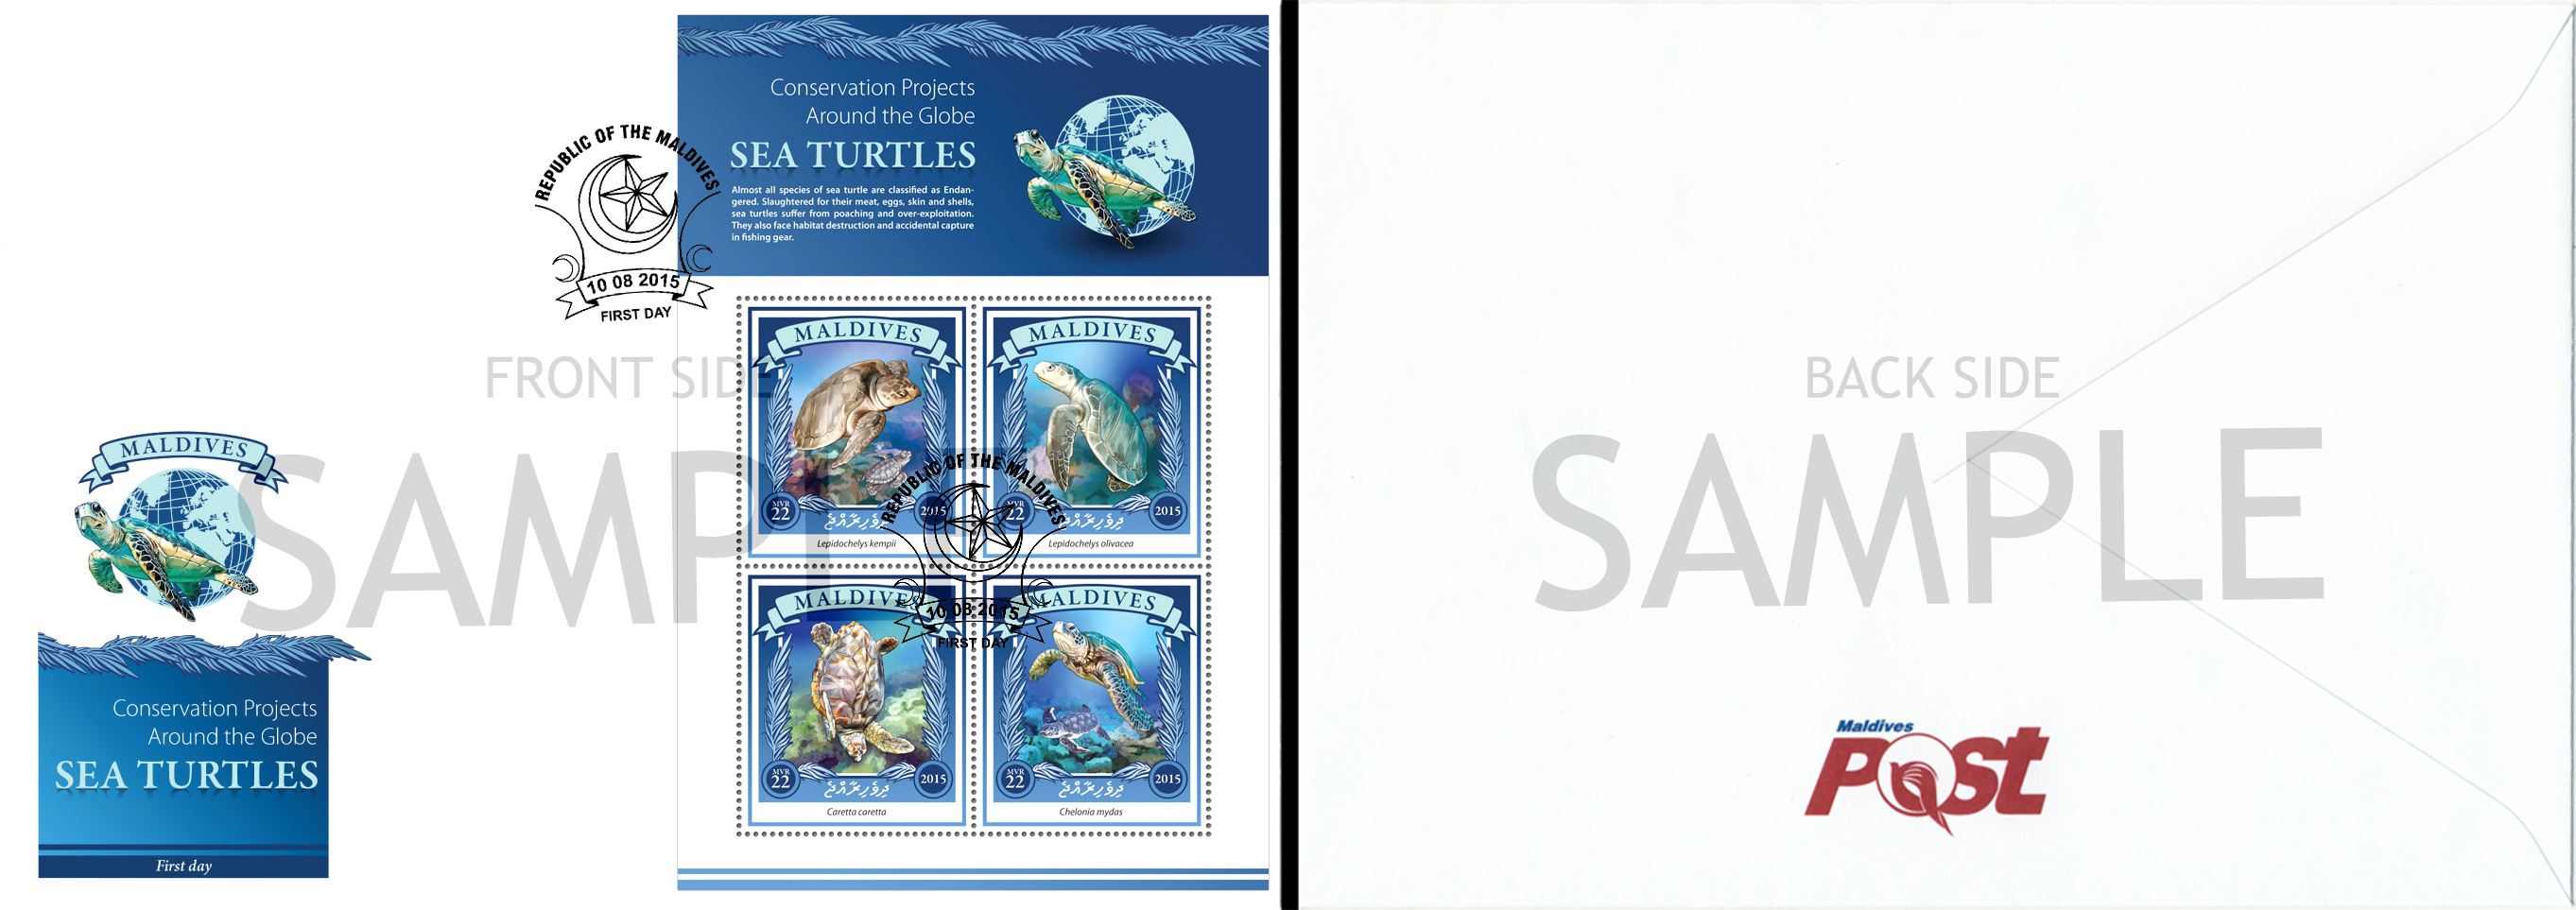 Sample of FDC - Issue of Maldives postage stamps